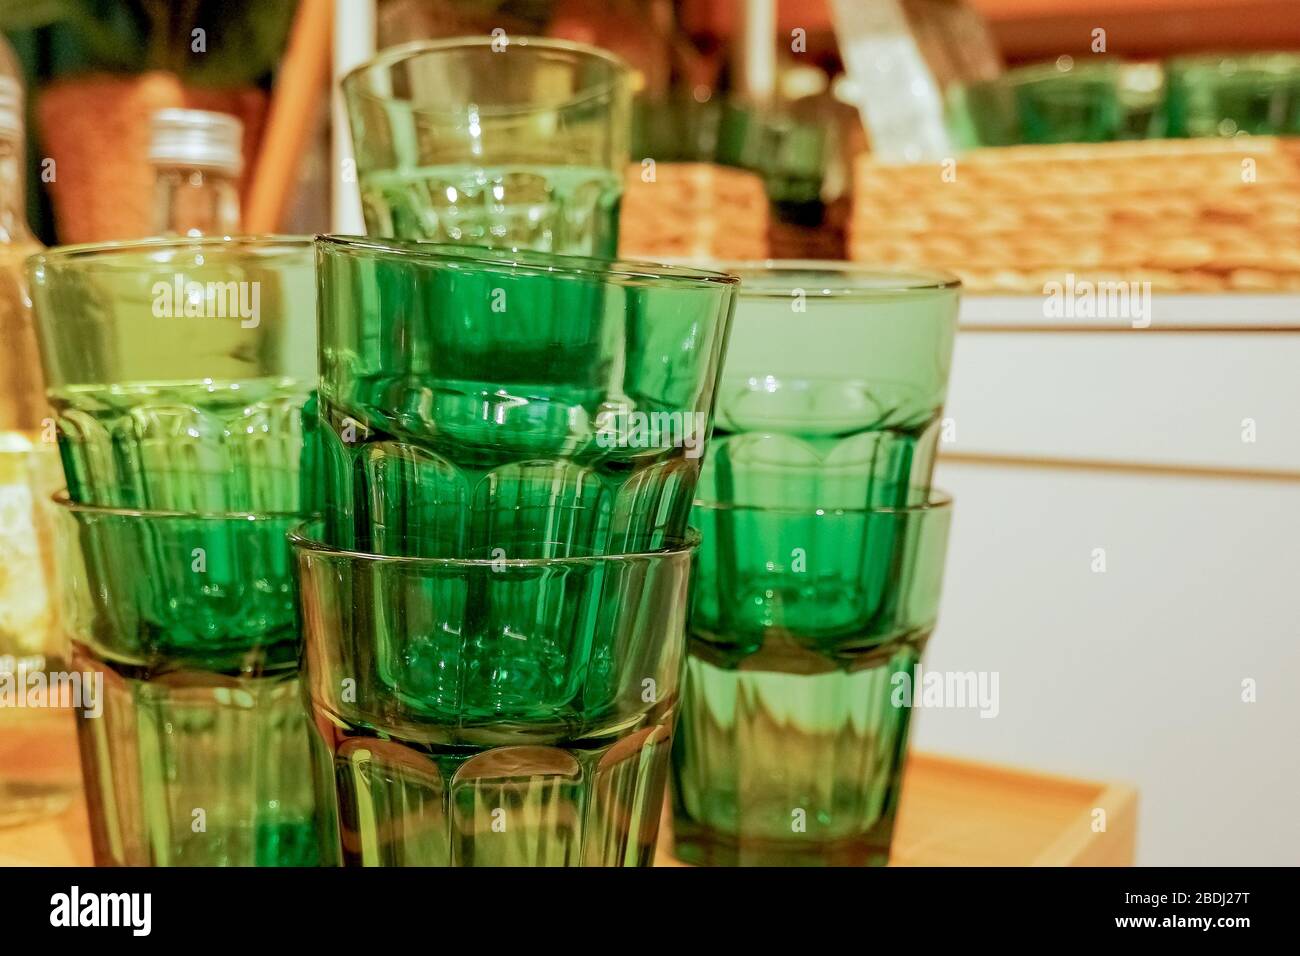 Thick glass mugs stacked. Drinking water storage containers. Light  background Stock Photo - Alamy